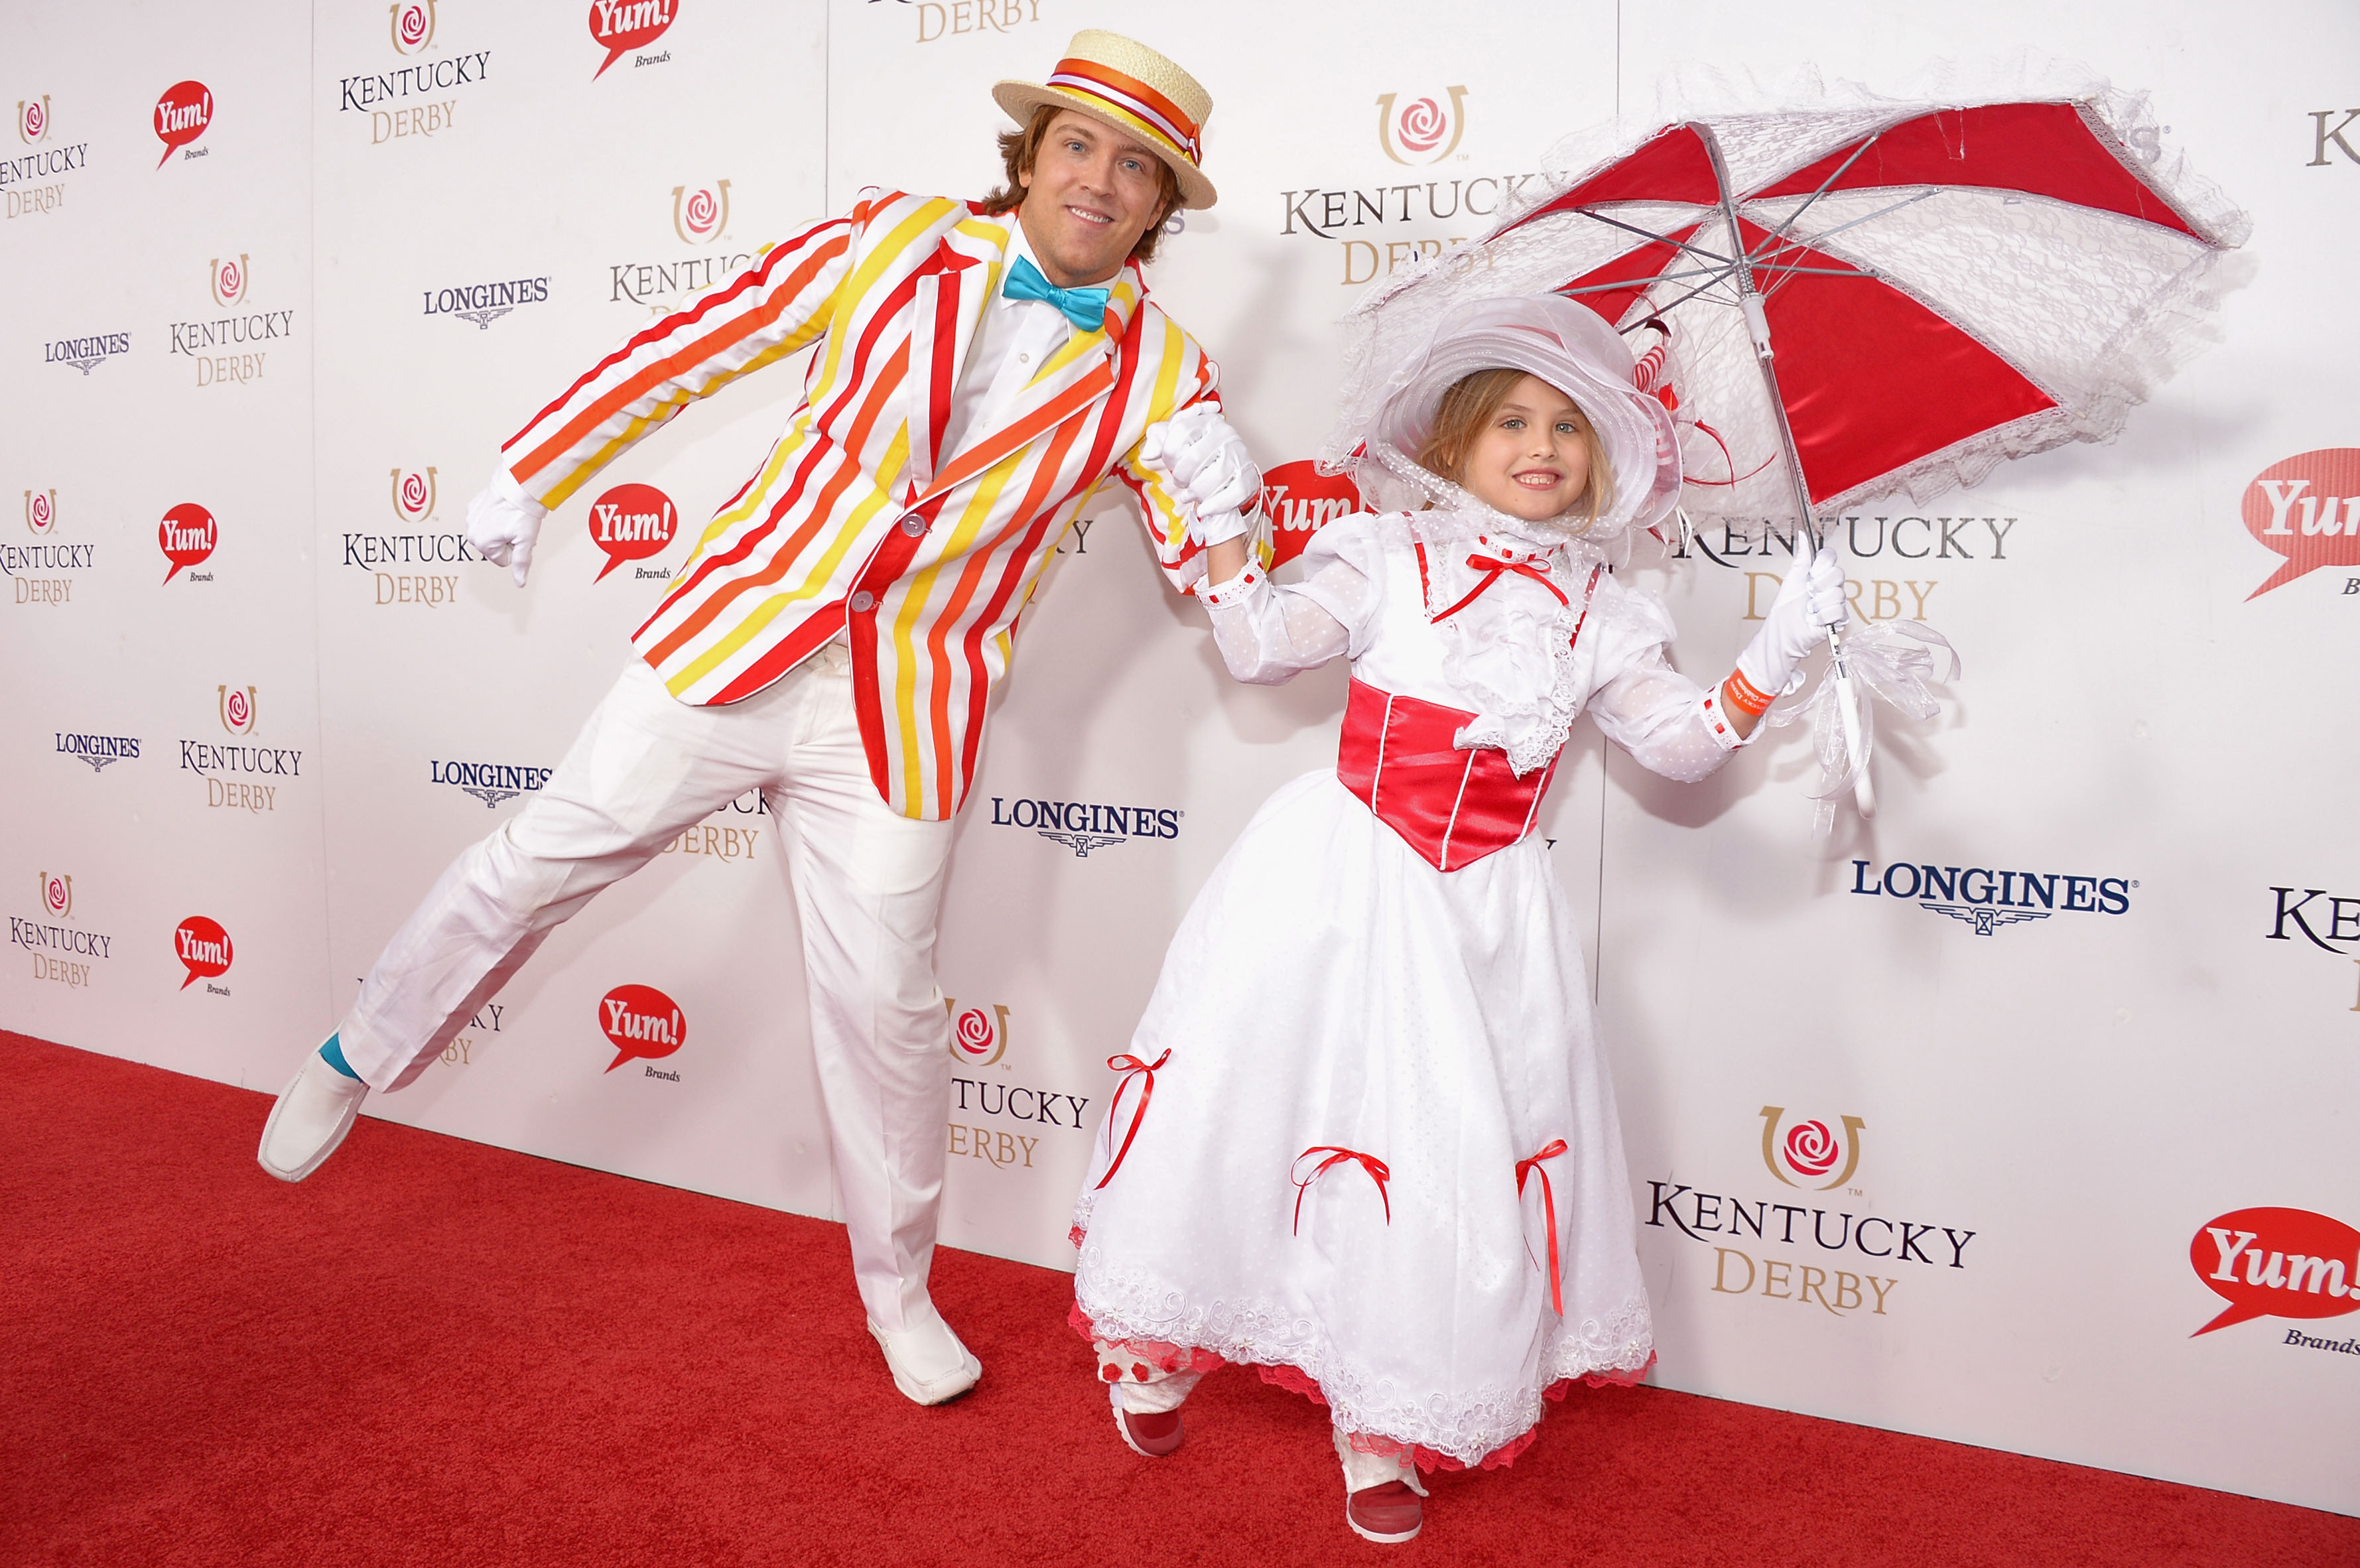 LOUISVILLE, KY - MAY 04:  (L-R) Larry Birkhead and Dannielynn Hope Marshall Birkhead at the GREY GOOSE Red Carpet Lounge at the Kentucky Derby at Churchill Downs on May 4, 2013 in Louisville, Kentucky.  (Photo by Theo Wargo/Getty Images for GREY GOOSE)